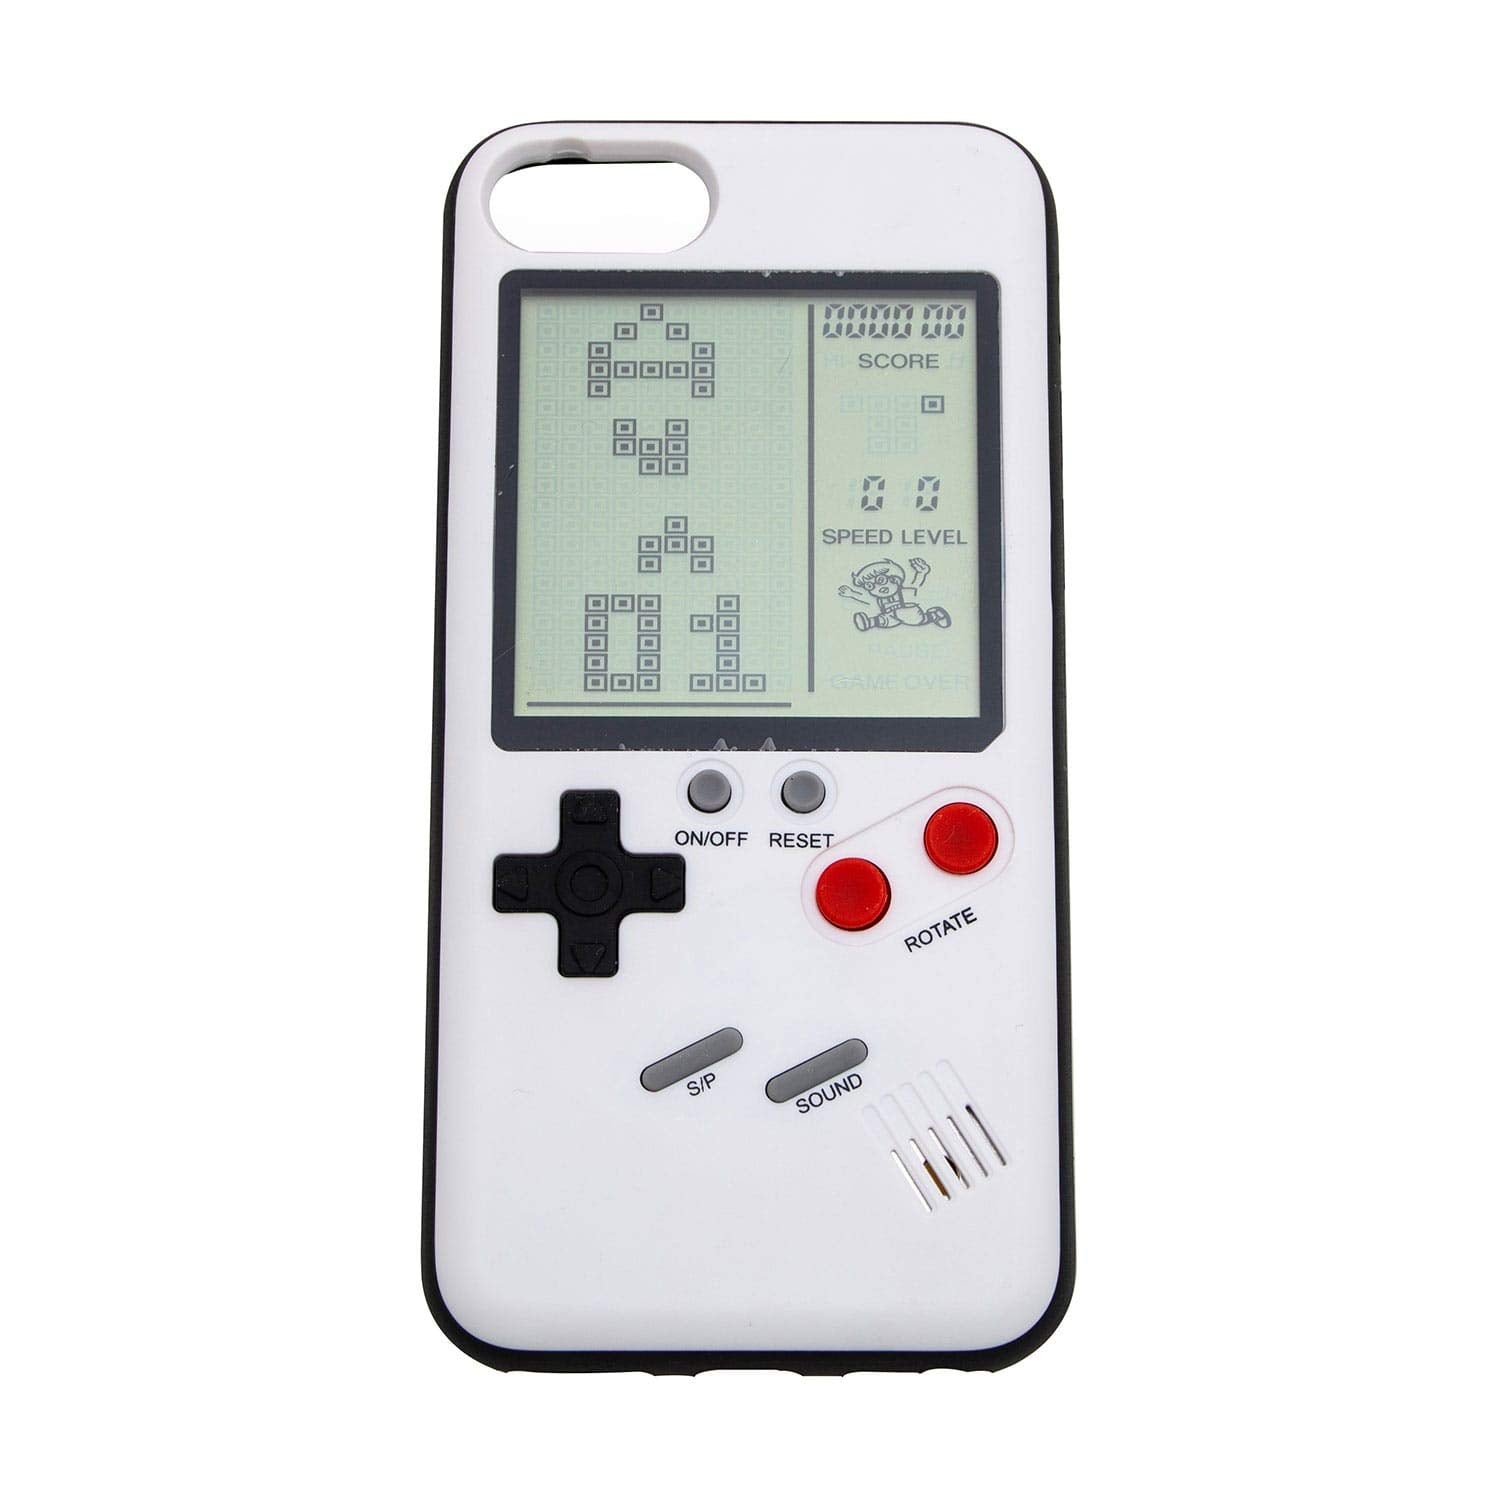 Handheld Console Case Compatible with Iphone 6/7/8 Phone Case